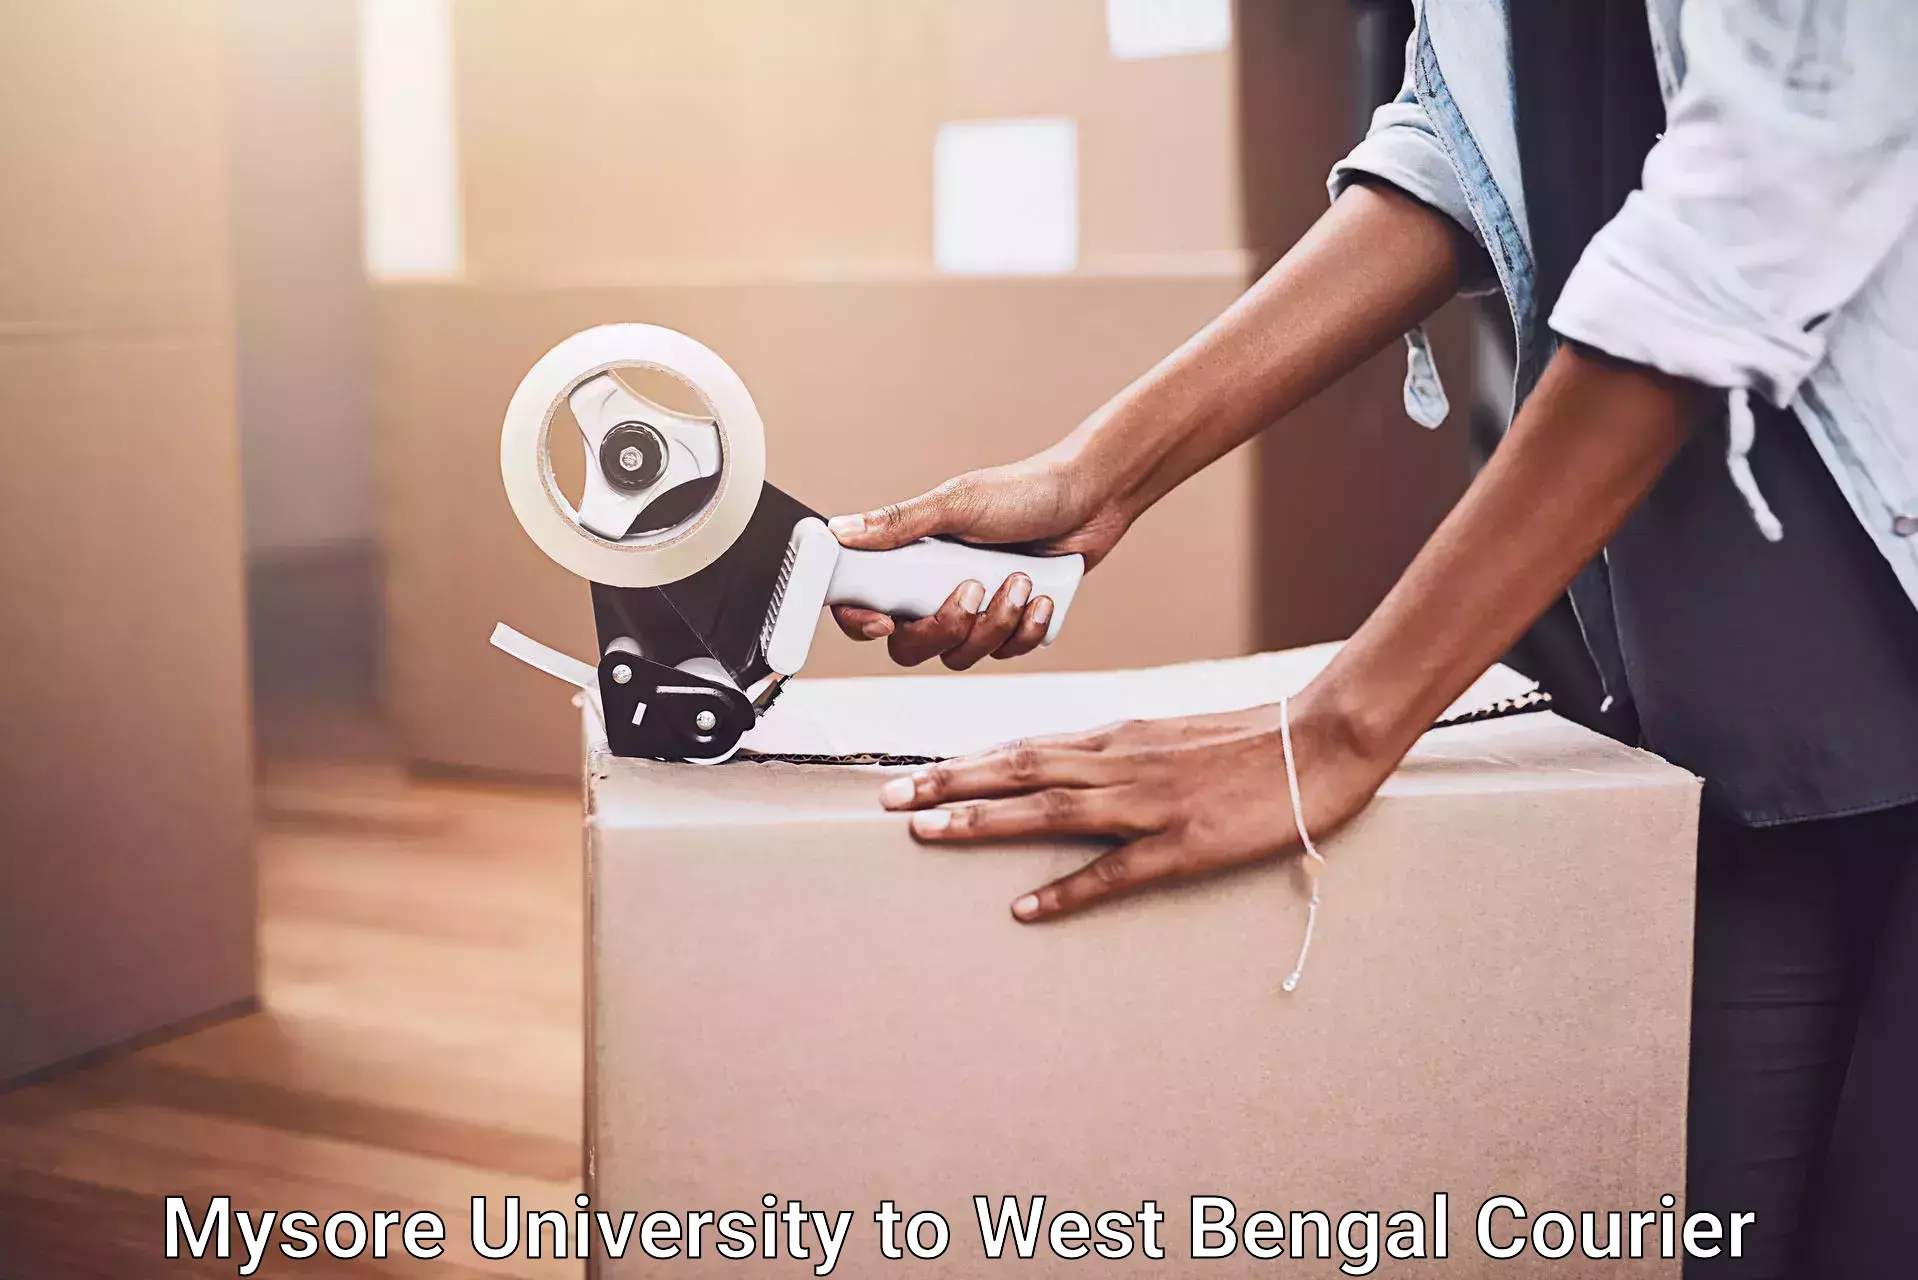 Professional furniture movers Mysore University to West Bengal